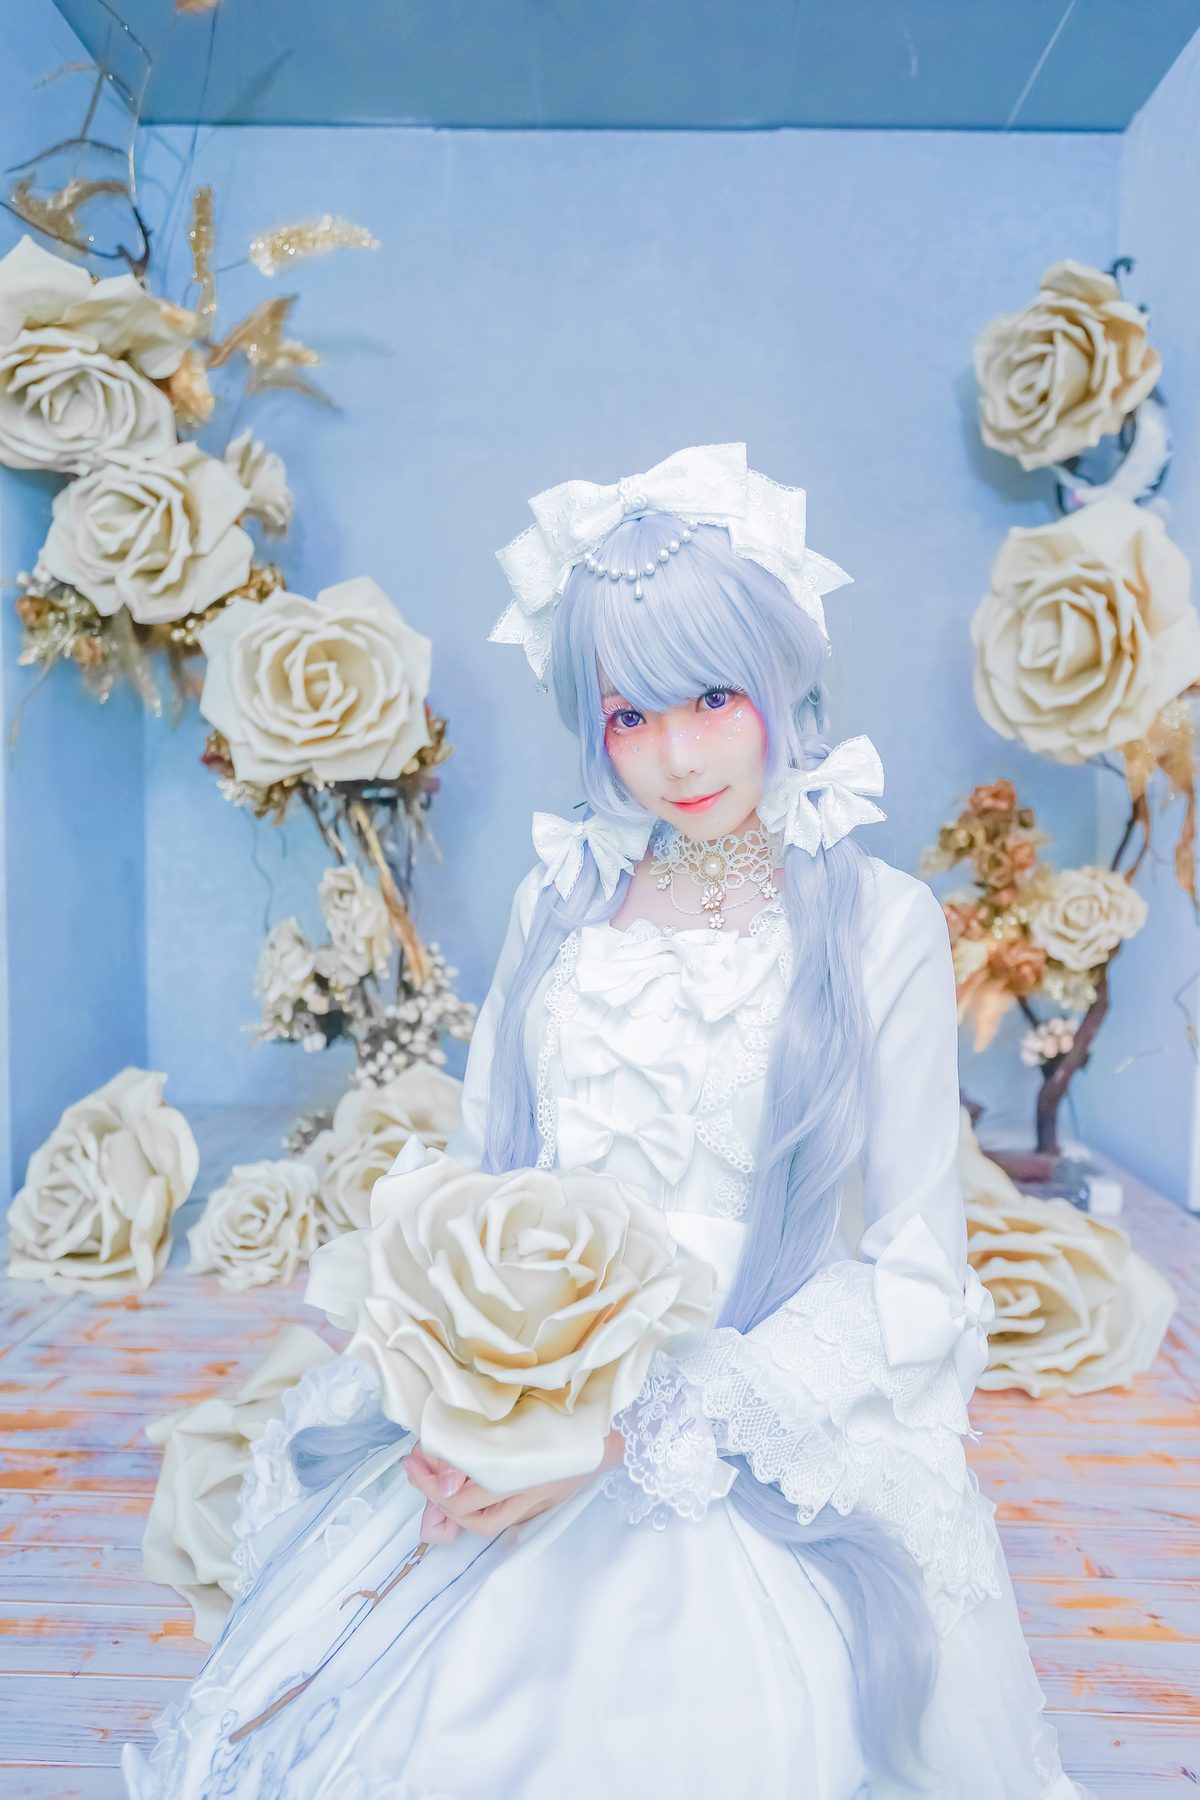 Coser@Ely_eee ElyEE子 TUESDAY TWINTAIL A 0071 3988221546.jpg